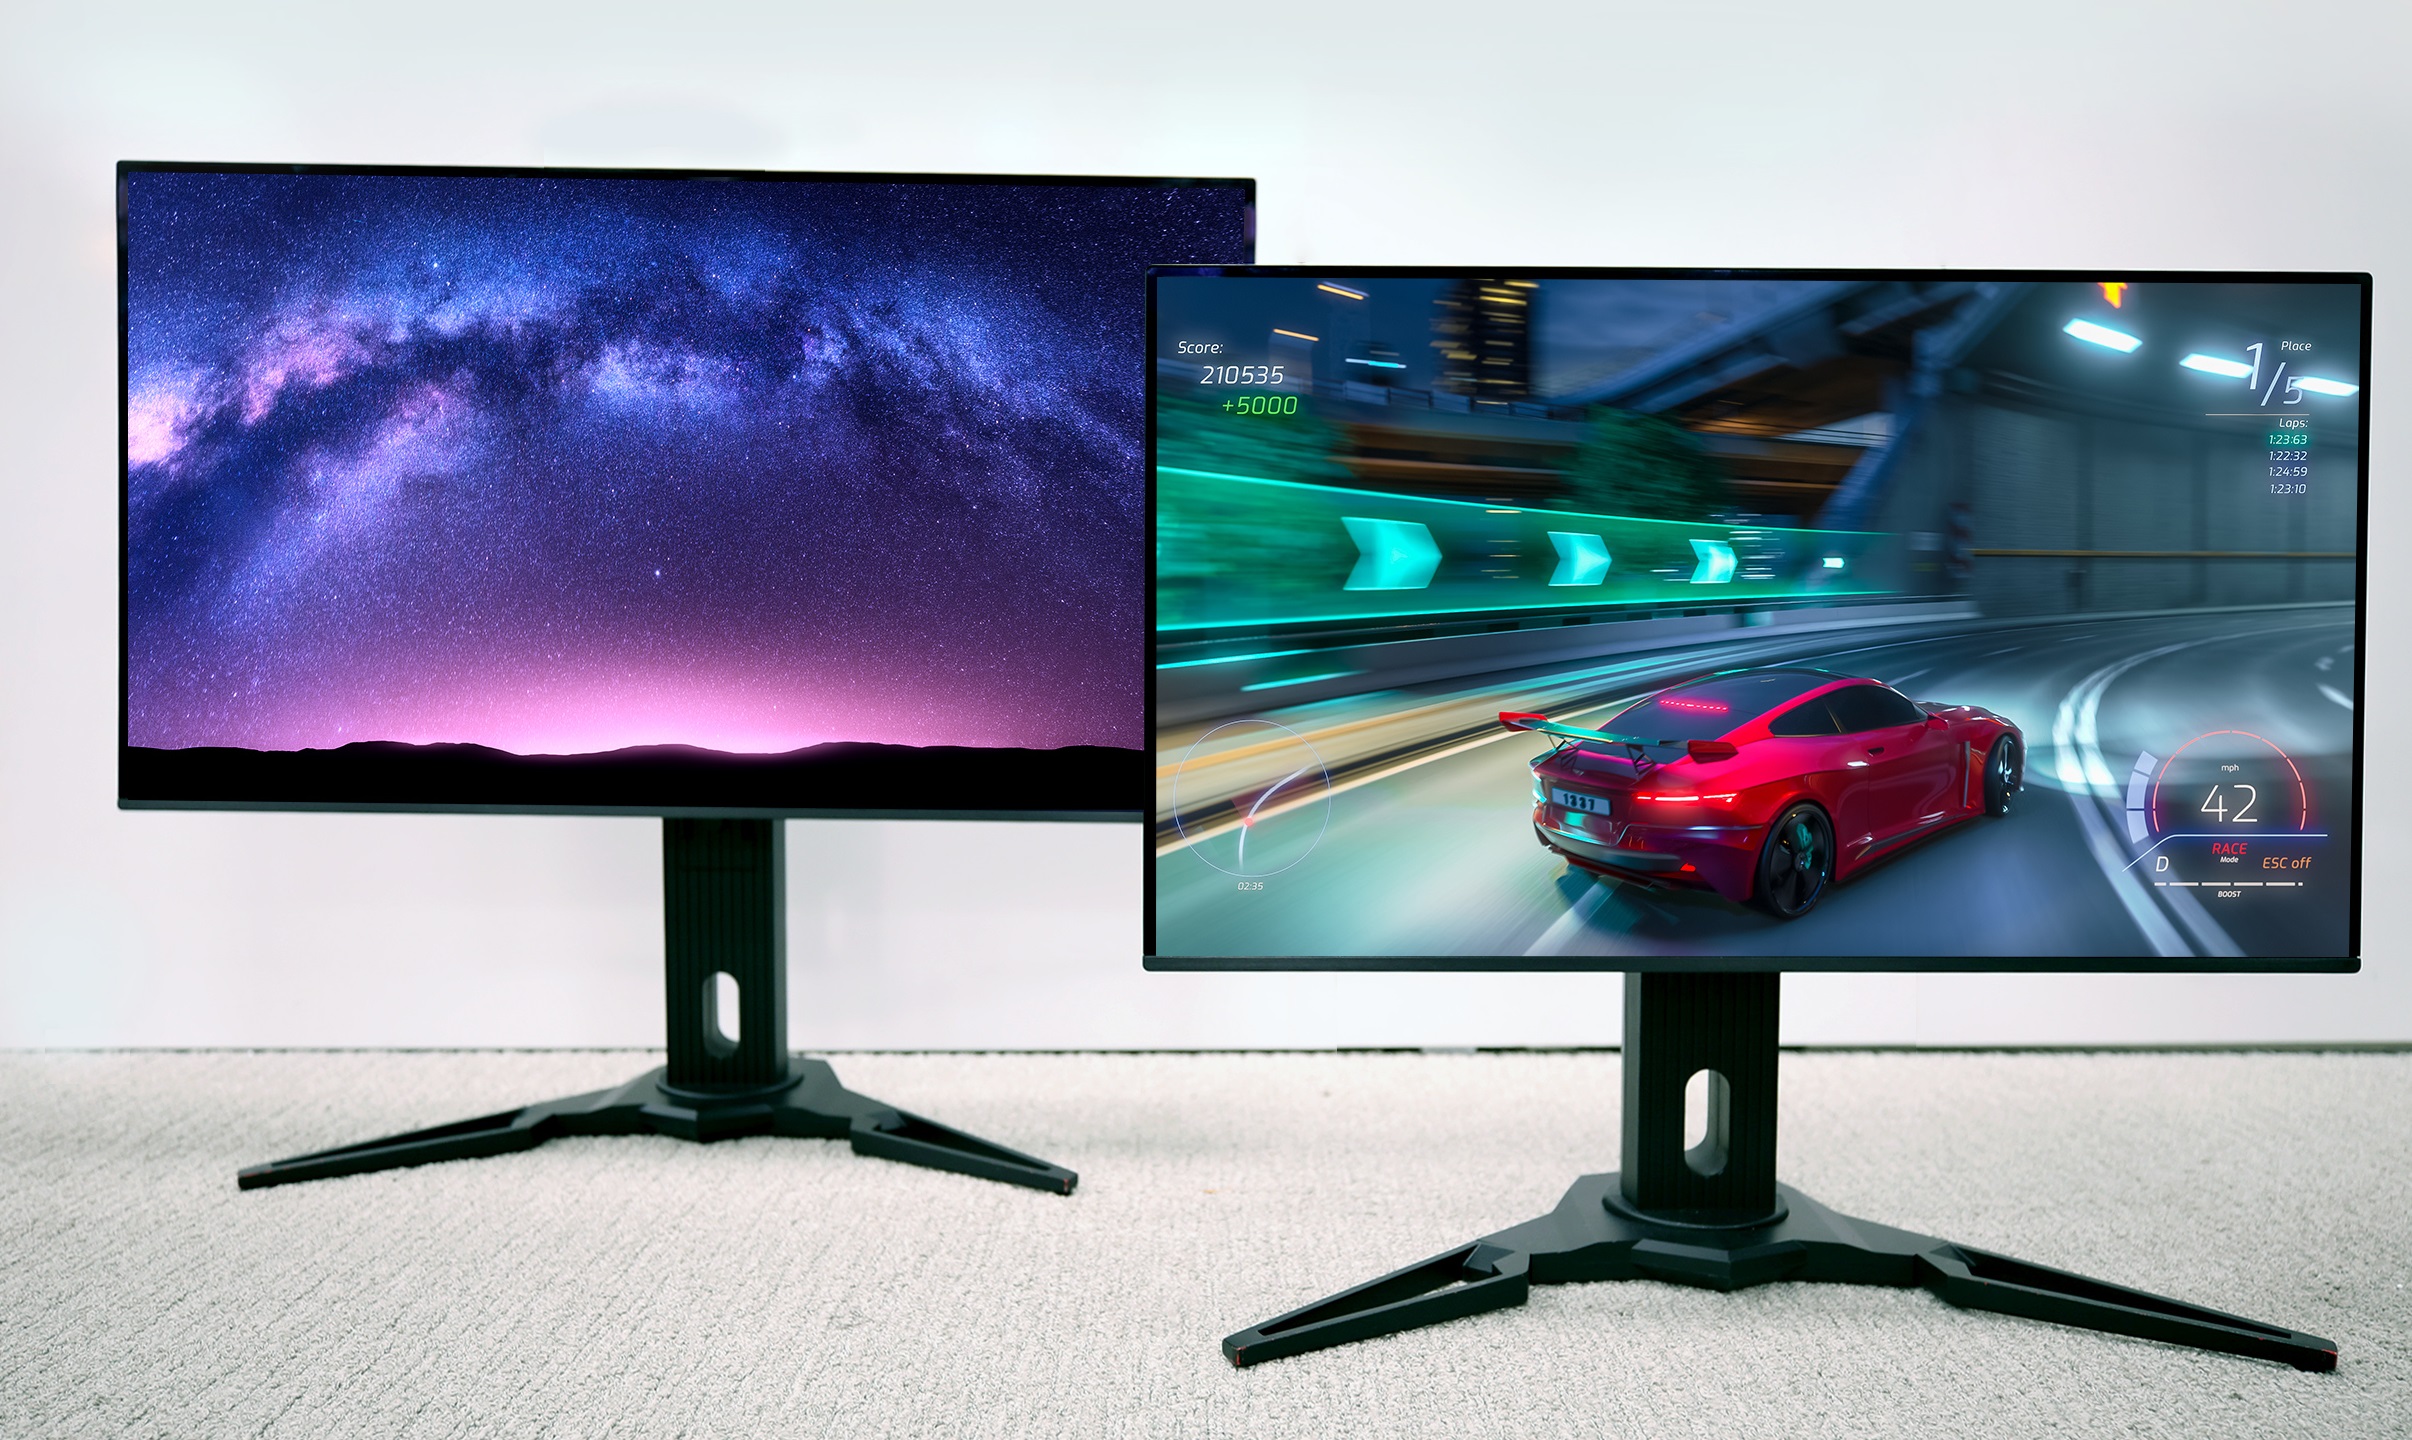 Samsung's new monitor sets OLED refresh rate record of 360 Hz — thanks to AI-driven algorithm